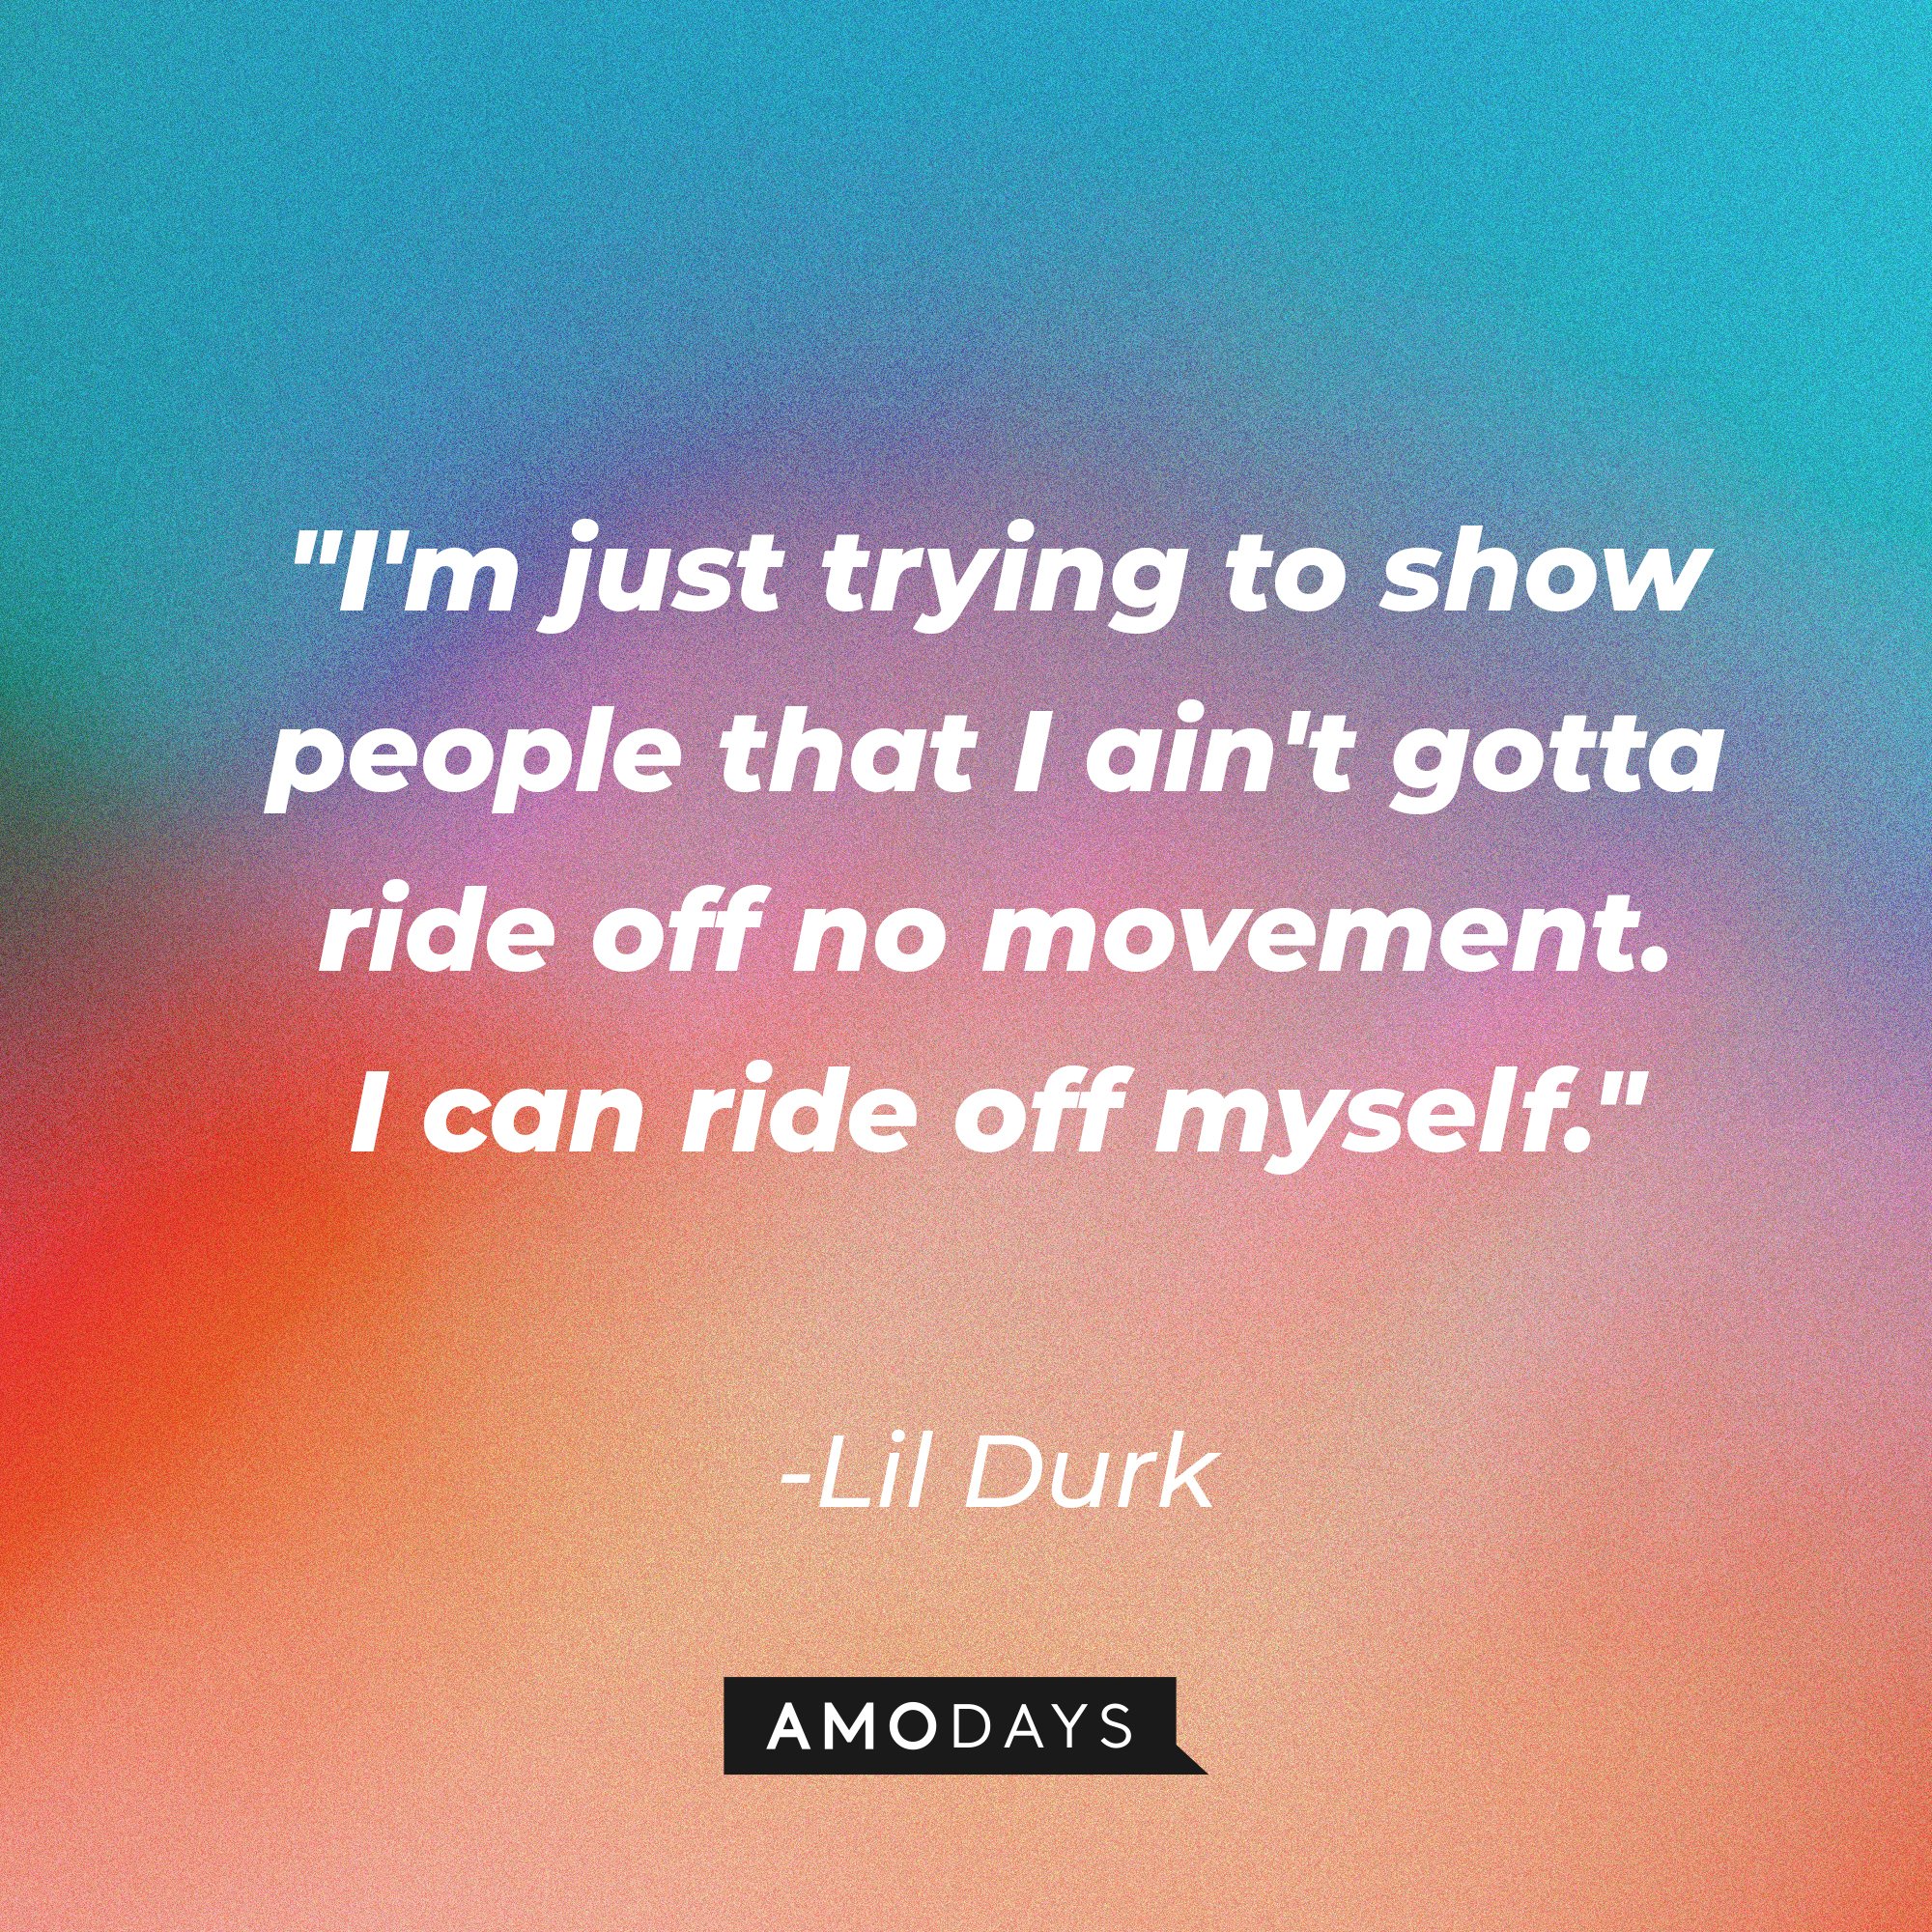 Lil Durk’s quote: "I'm just trying to show people that I ain't gotta ride off no movement. I can ride off myself." | Image: AmoDays